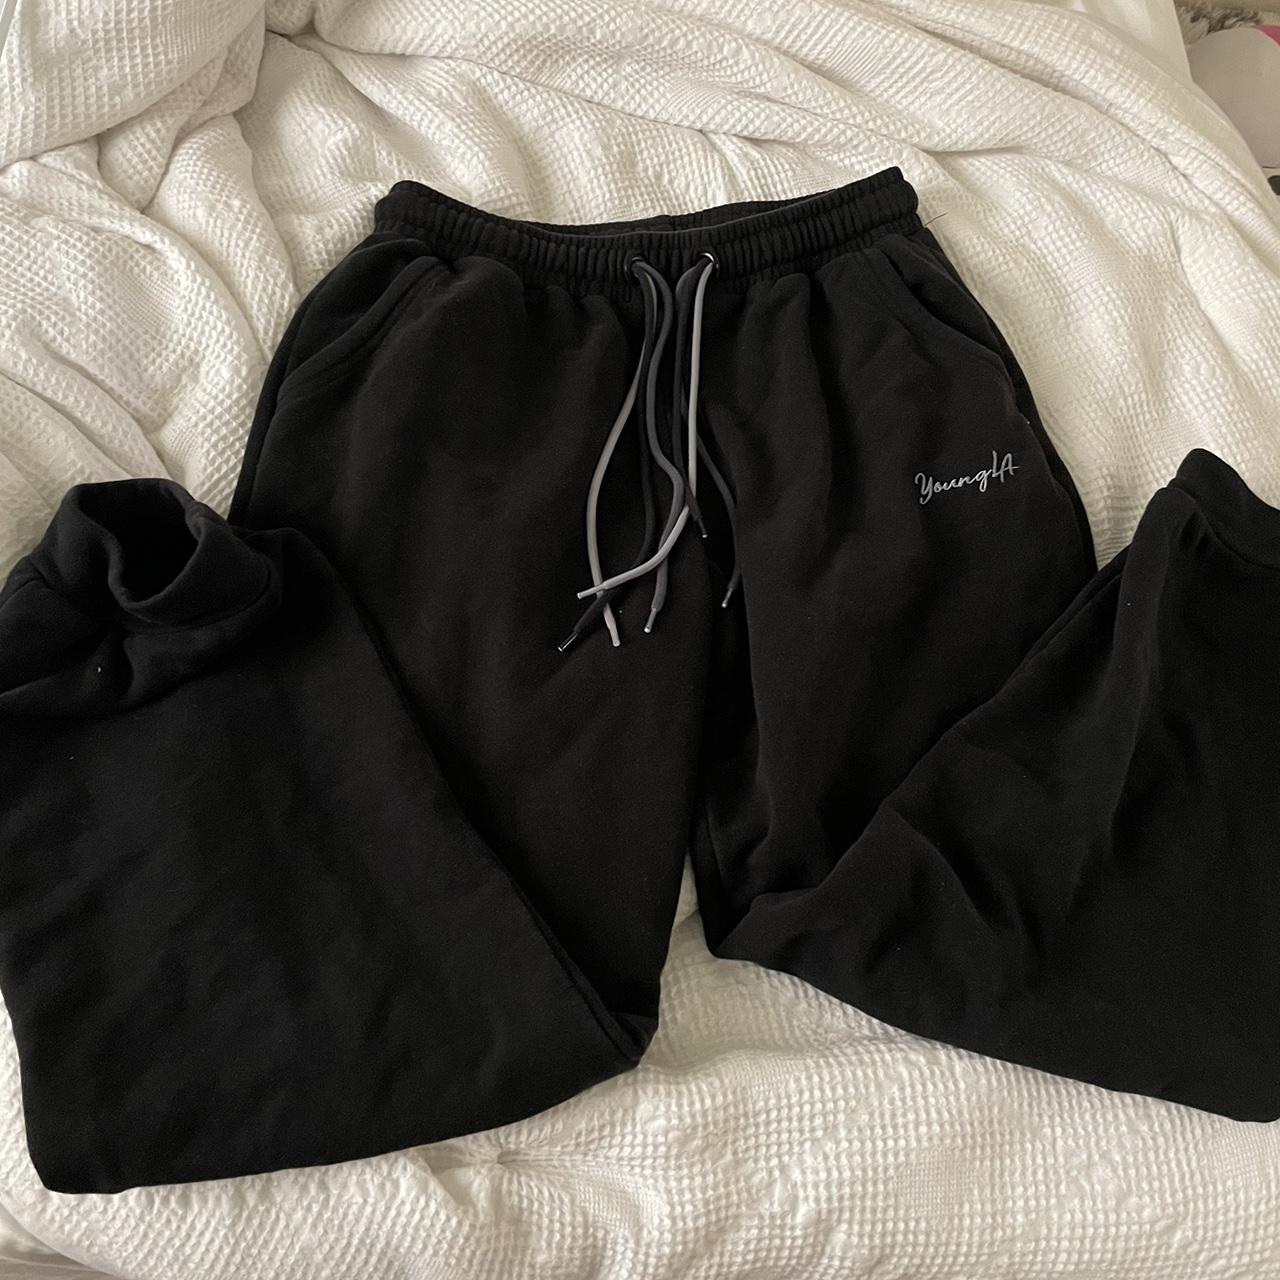 W211 Dreamers joggers youngla for her pink dusty - Depop